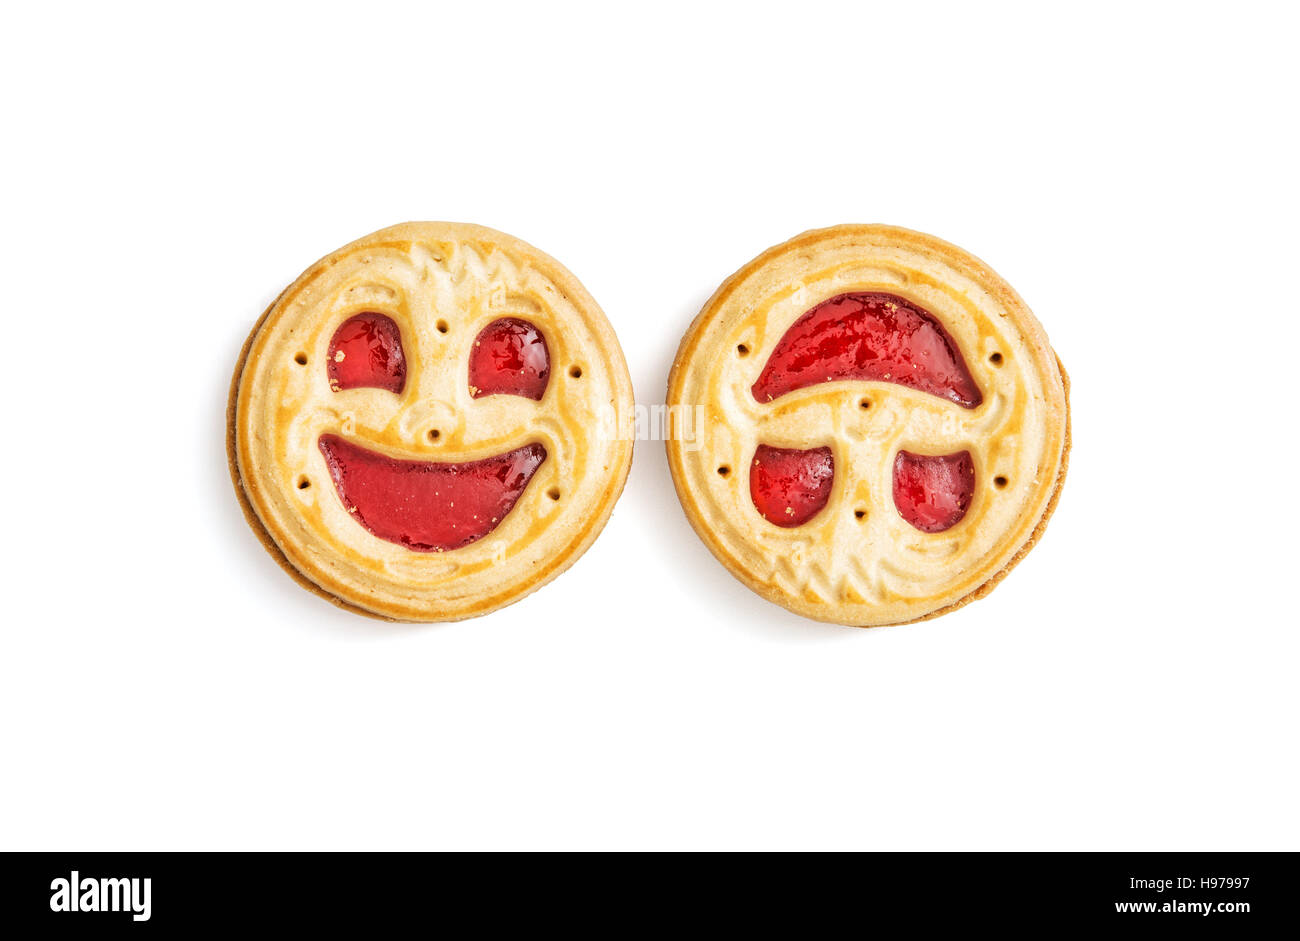 Two round jam biscuits smiling faces isolated on the white background. Humorous sweet food. Tasty cookies. Good mood. Stock Photo